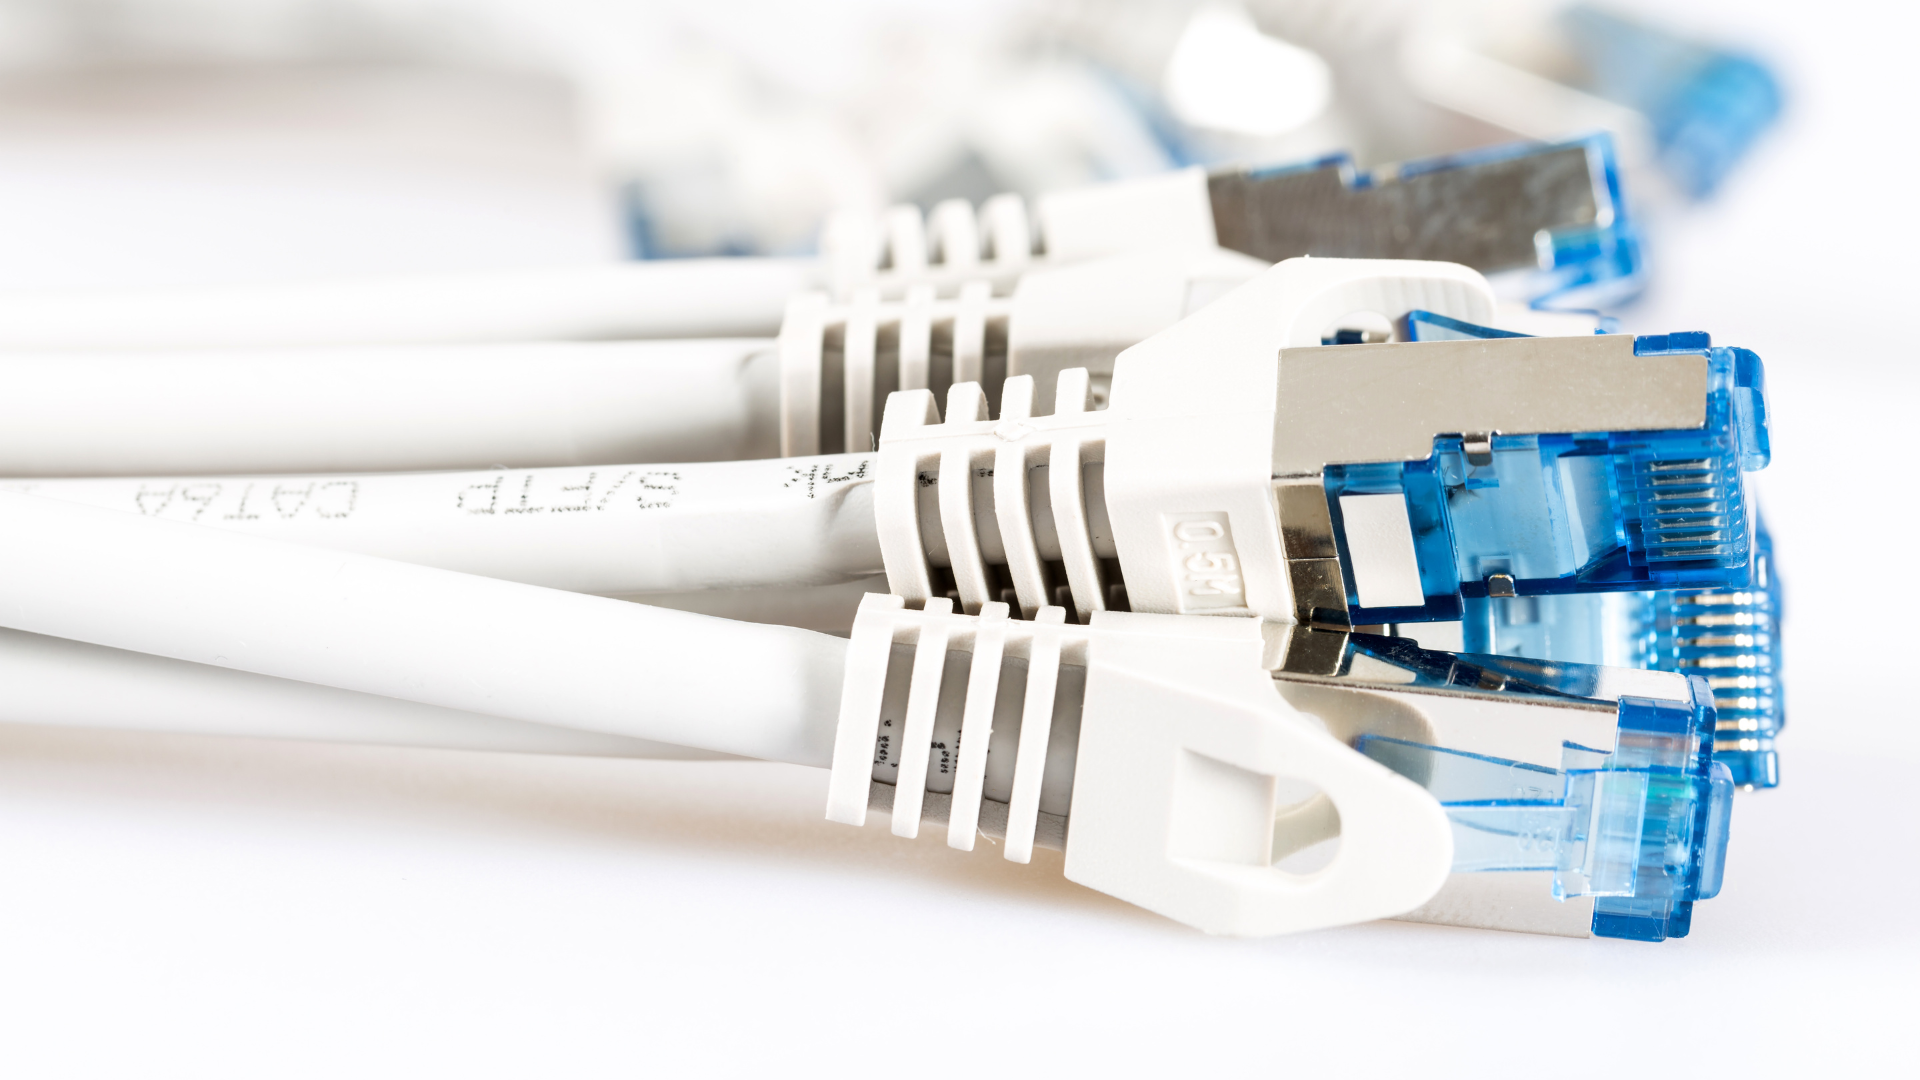 White ethernet cables with blue ends